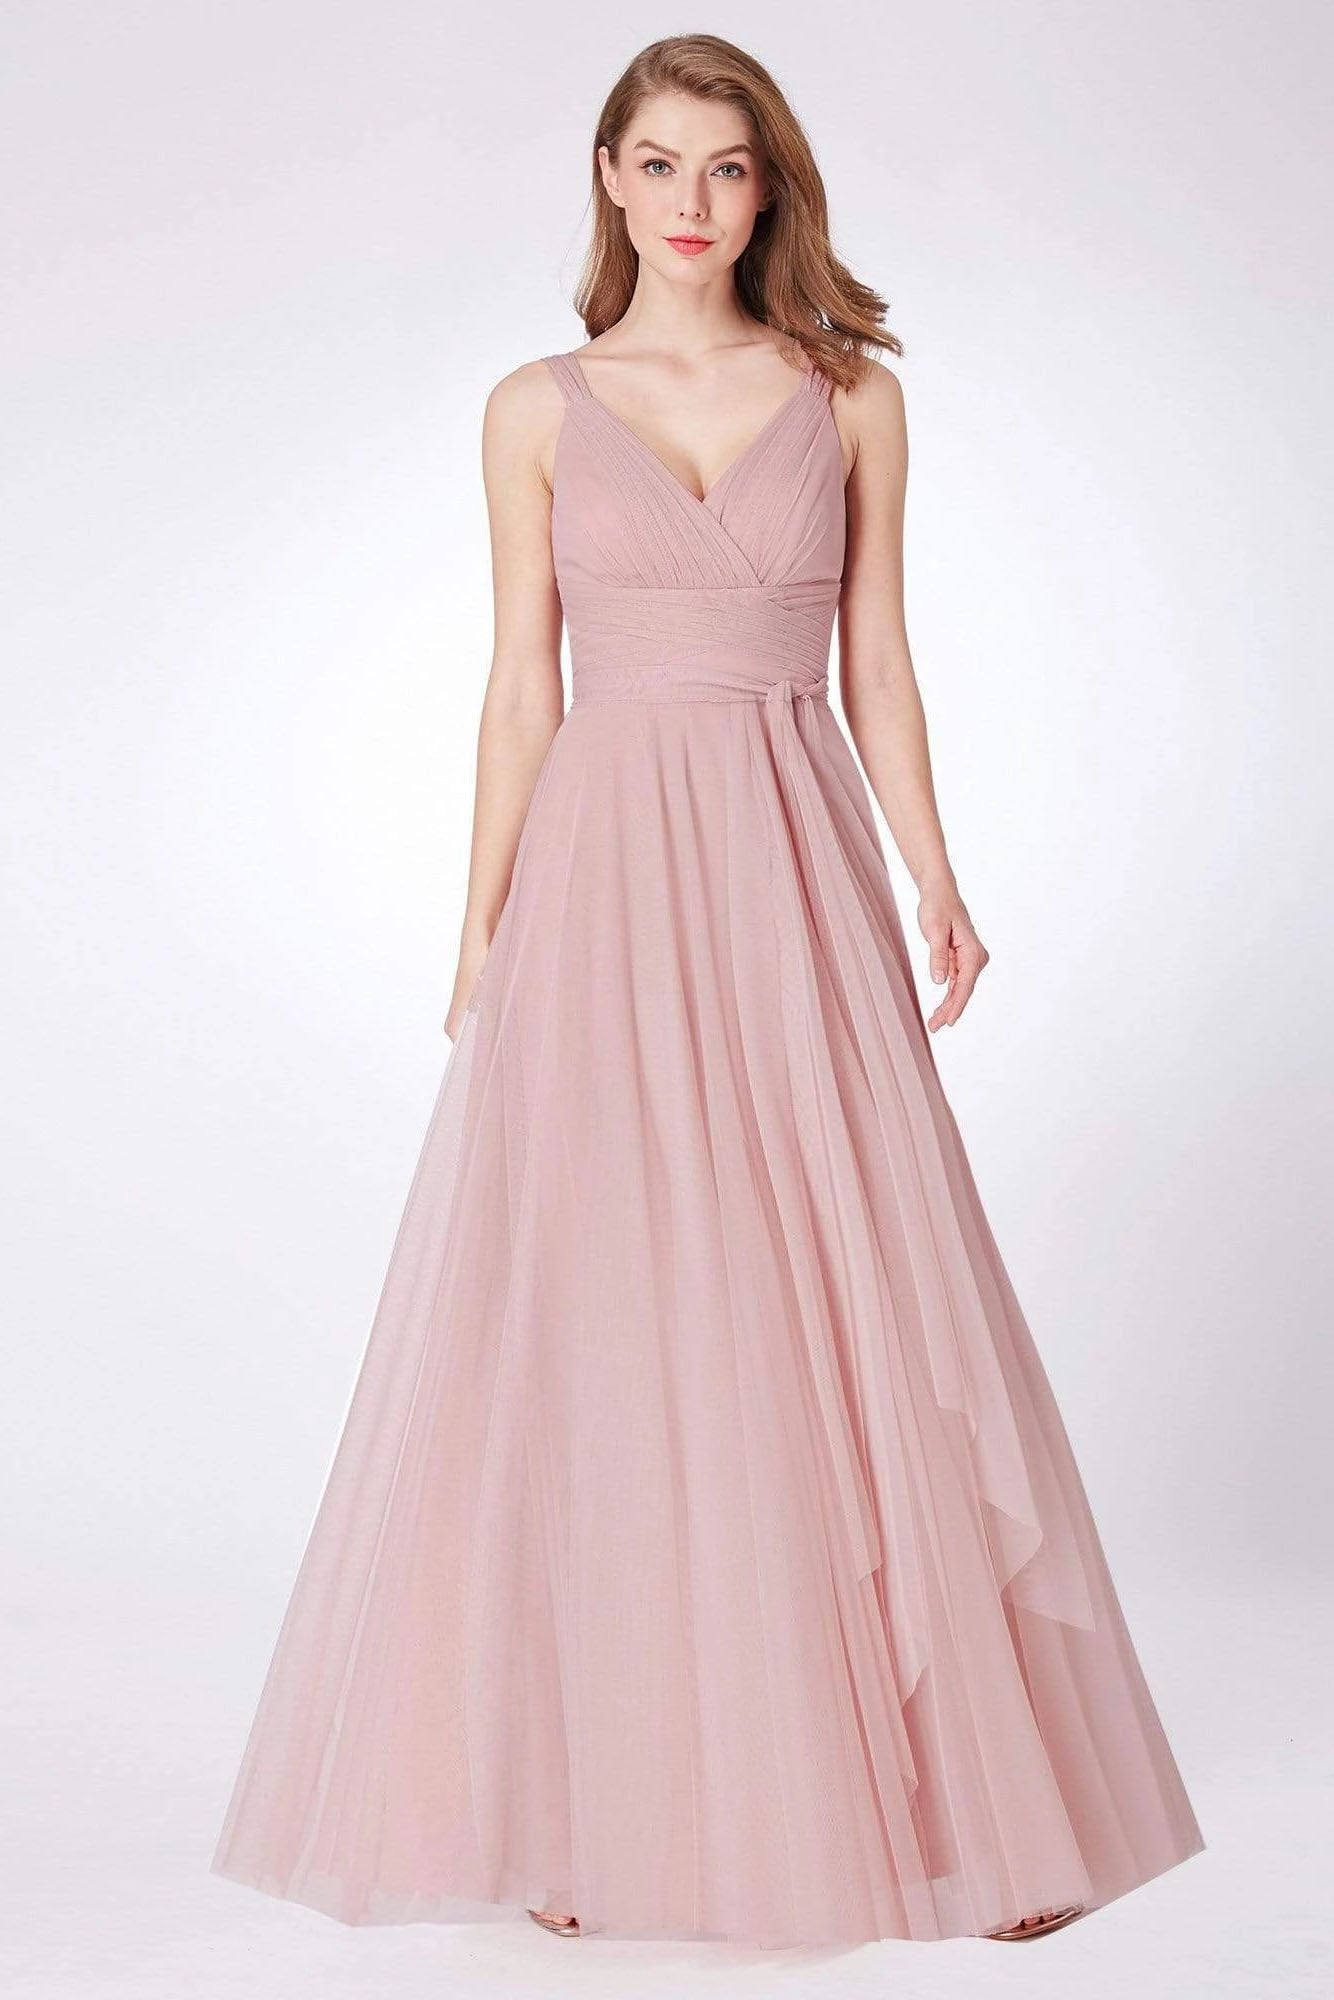 Simple A Line Pink V Neck Tulle Sleeveless Prom Dresses Long Bridesmaid Dresses STC15383